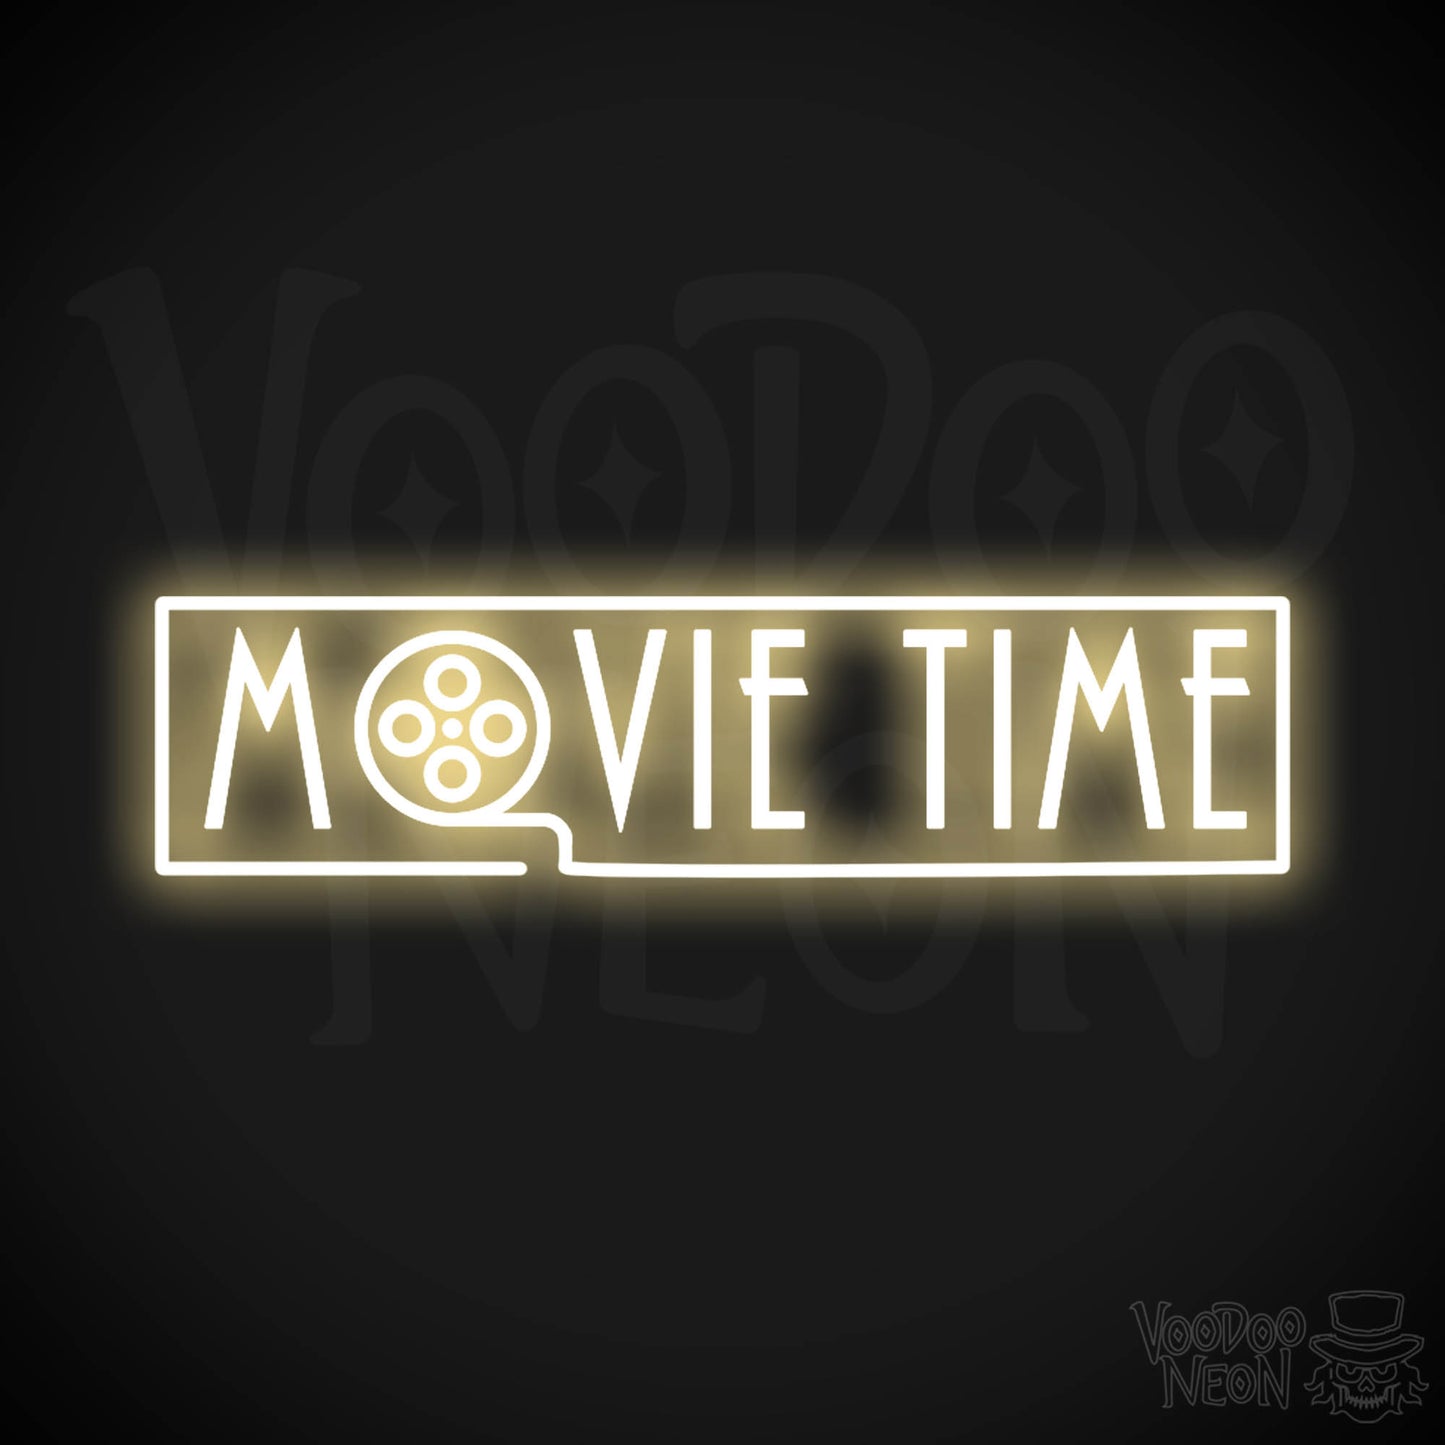 Movie Time Neon Sign - Neon Movie Time Sign - Color Warm White